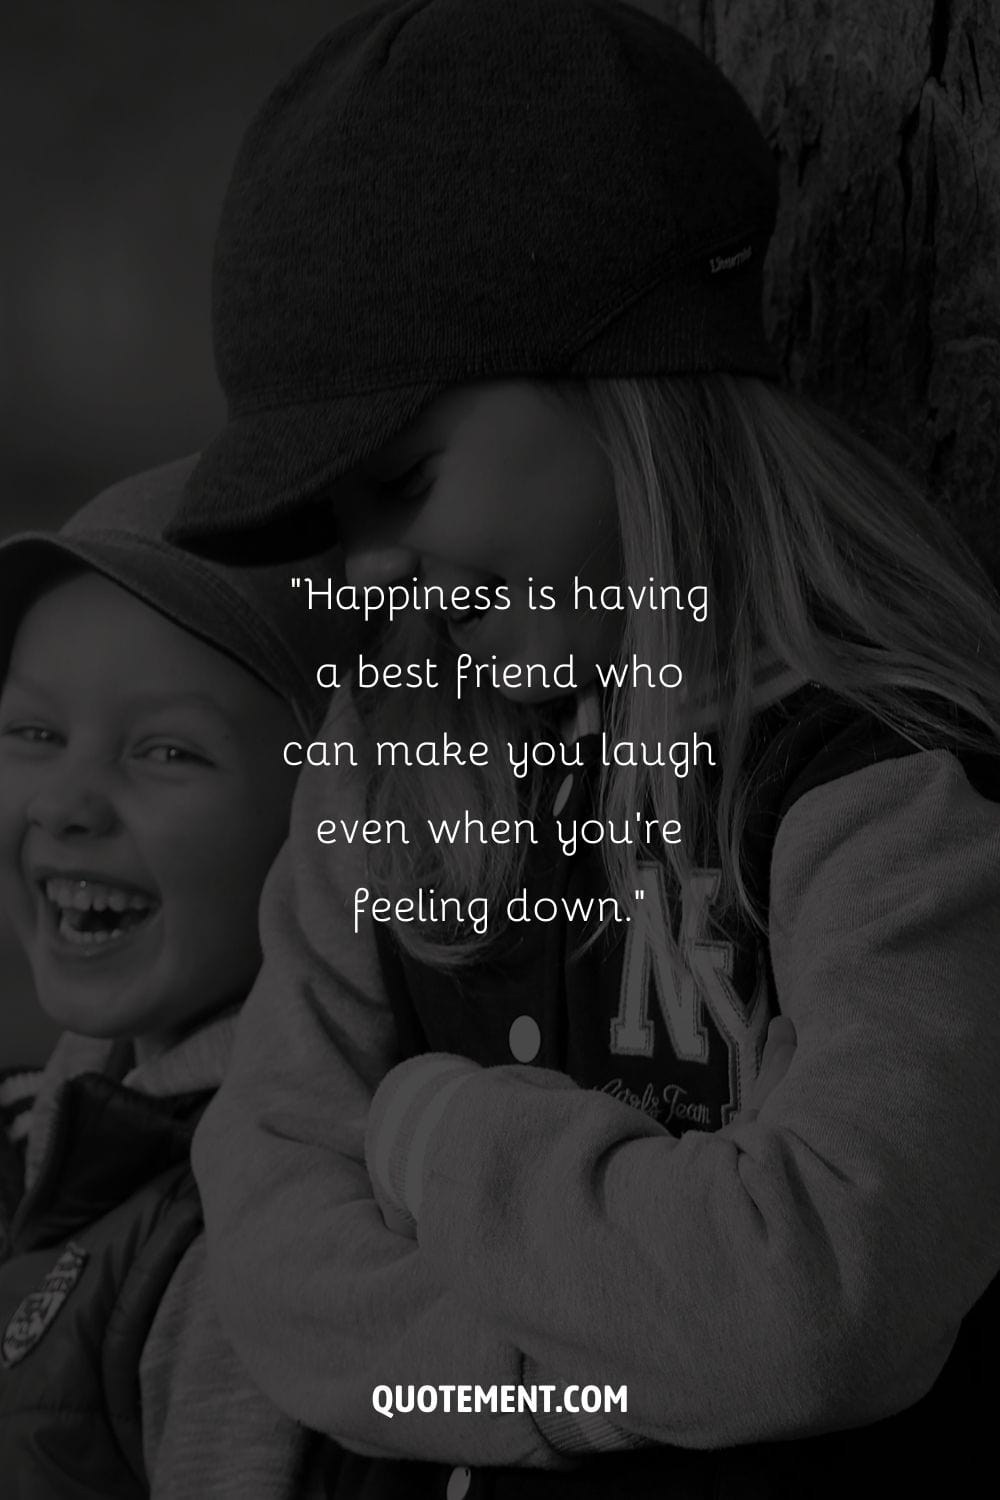 boy and girl share laughter and companionship representing a friend making you laugh quote